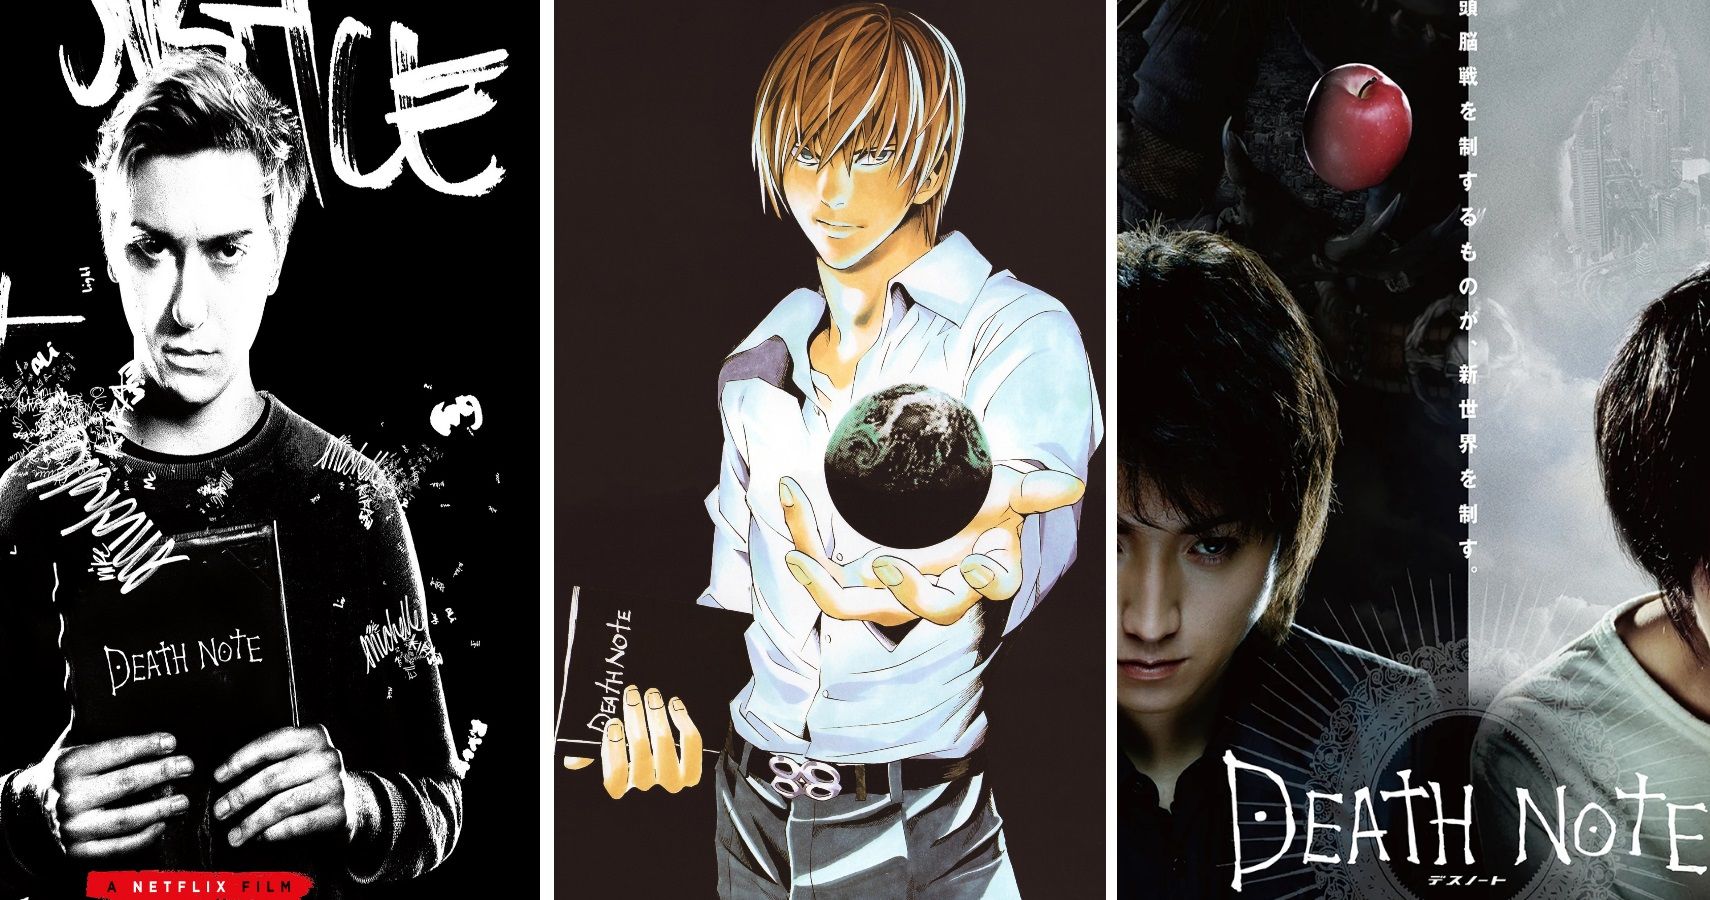 Anime can be adapted into live action: Netflix One Piece Won't Repeat Death  Note Mistake, Says Executive Producer of Live Action Series - FandomWire